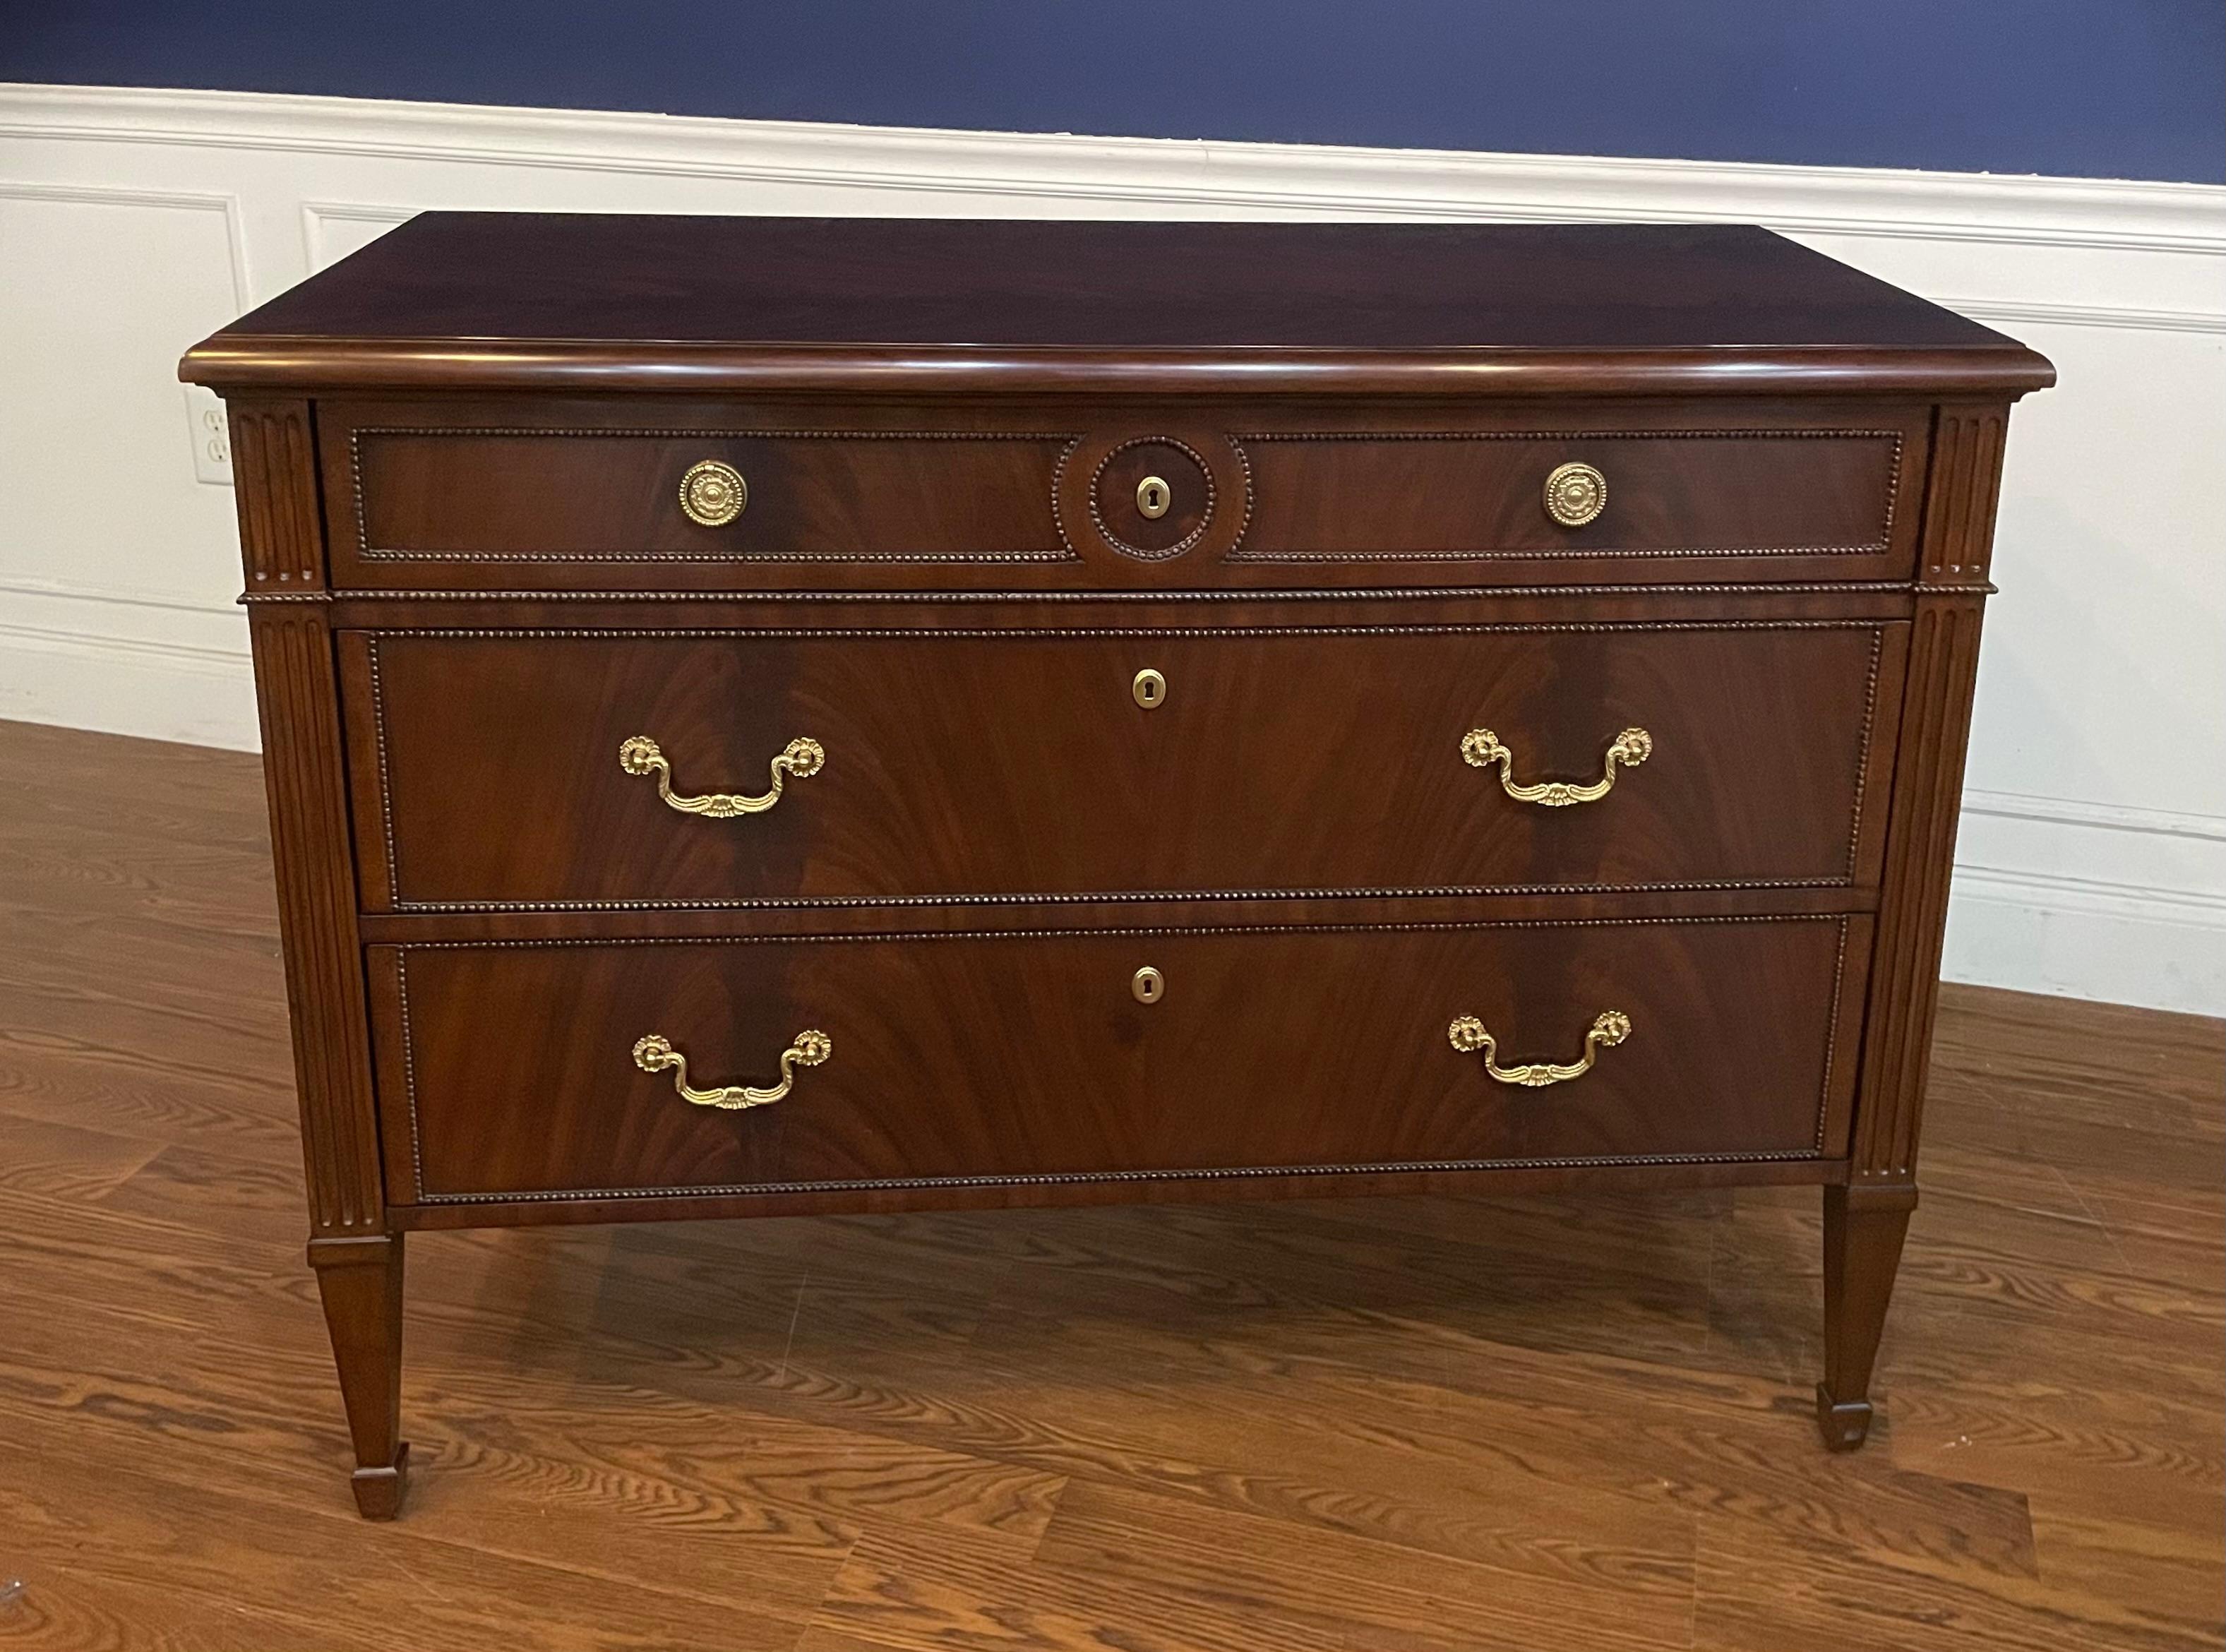 This is a Louis XVI style drawer chest. It features three drawers, solid brass hardware and faux key holes. The top, drawer fronts and sides have swirly crotch mahogany. The drawers are dovetailed and oak lined. The legs are classic Louis XVI